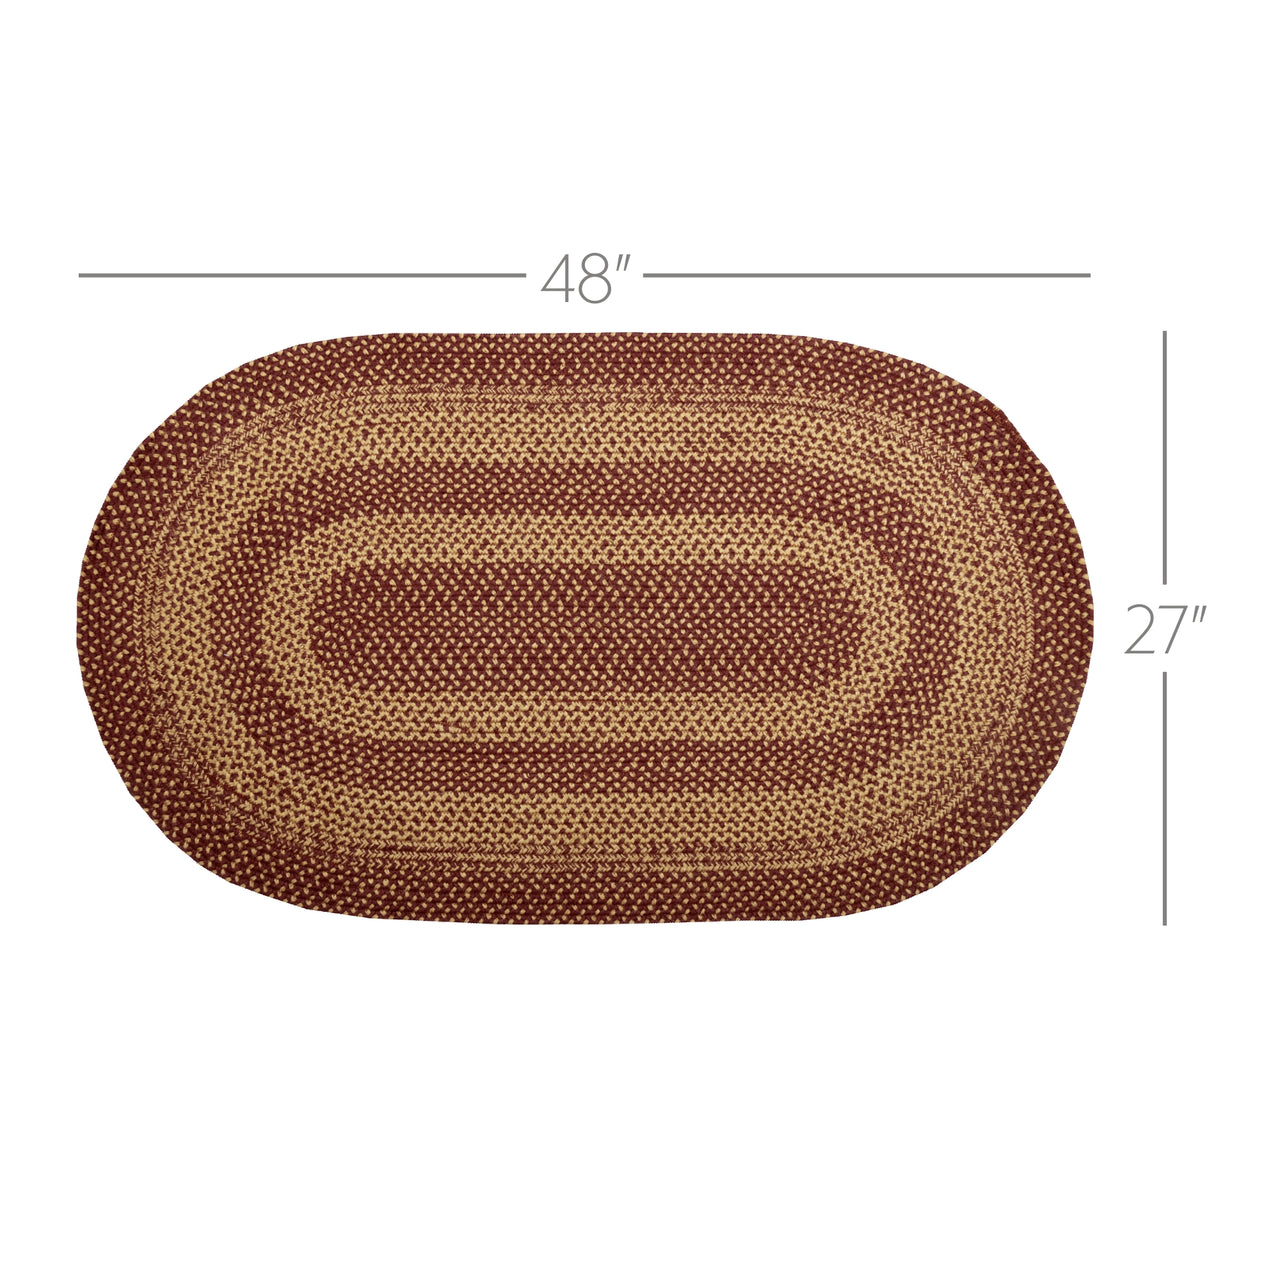 Burgundy Tan Jute Braided Rug Oval with Rug Pad 27"x48" VHC Brands